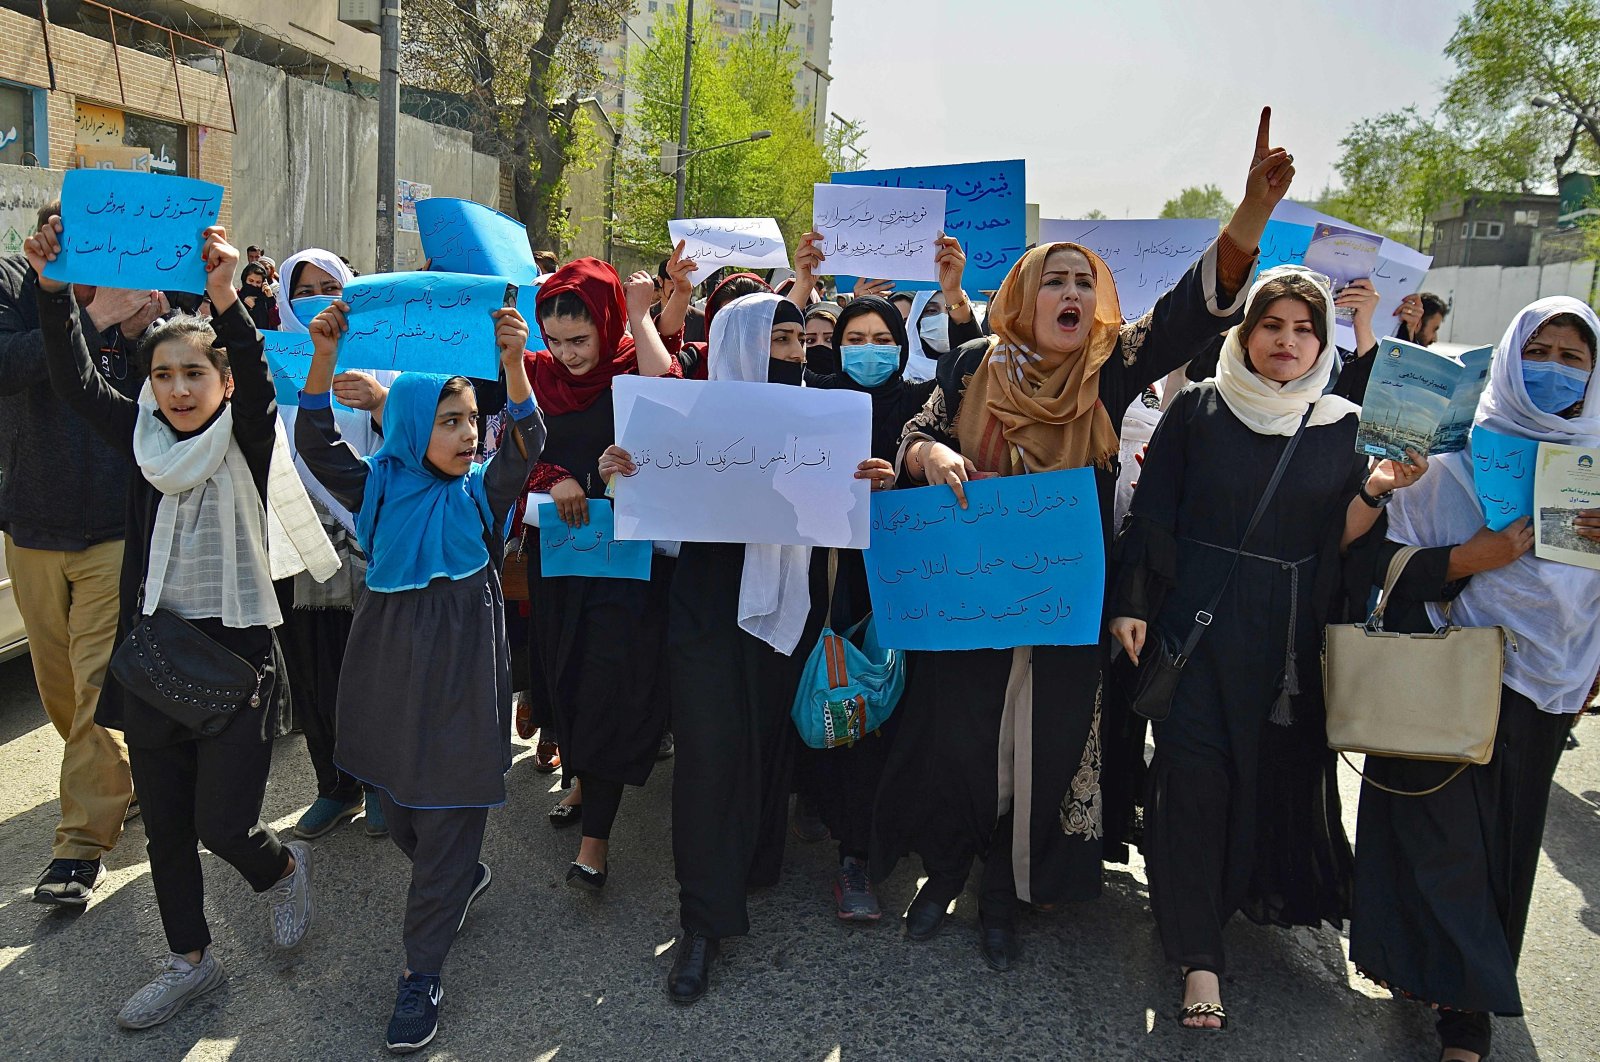 Afghan women and girls take part in a protest in front of the Ministry of Education to reopen high schools for girls, Kabul, Afghanistan, March 26, 2022. (AFP Photo)